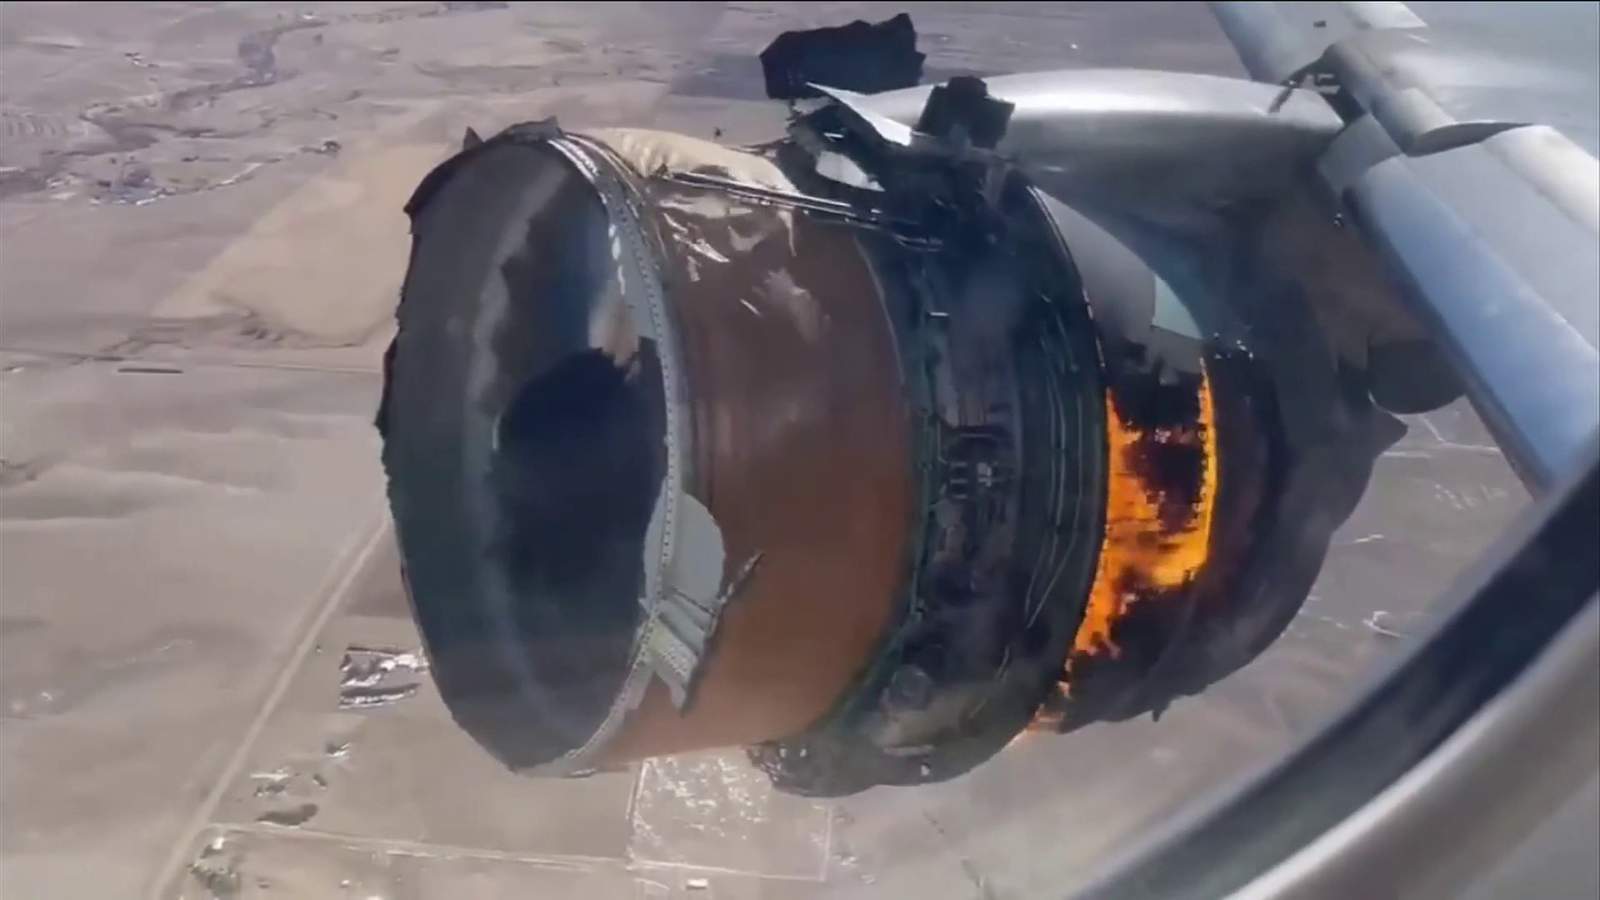 Boeing recommends airlines ground all 777s with type of engine that blew apart